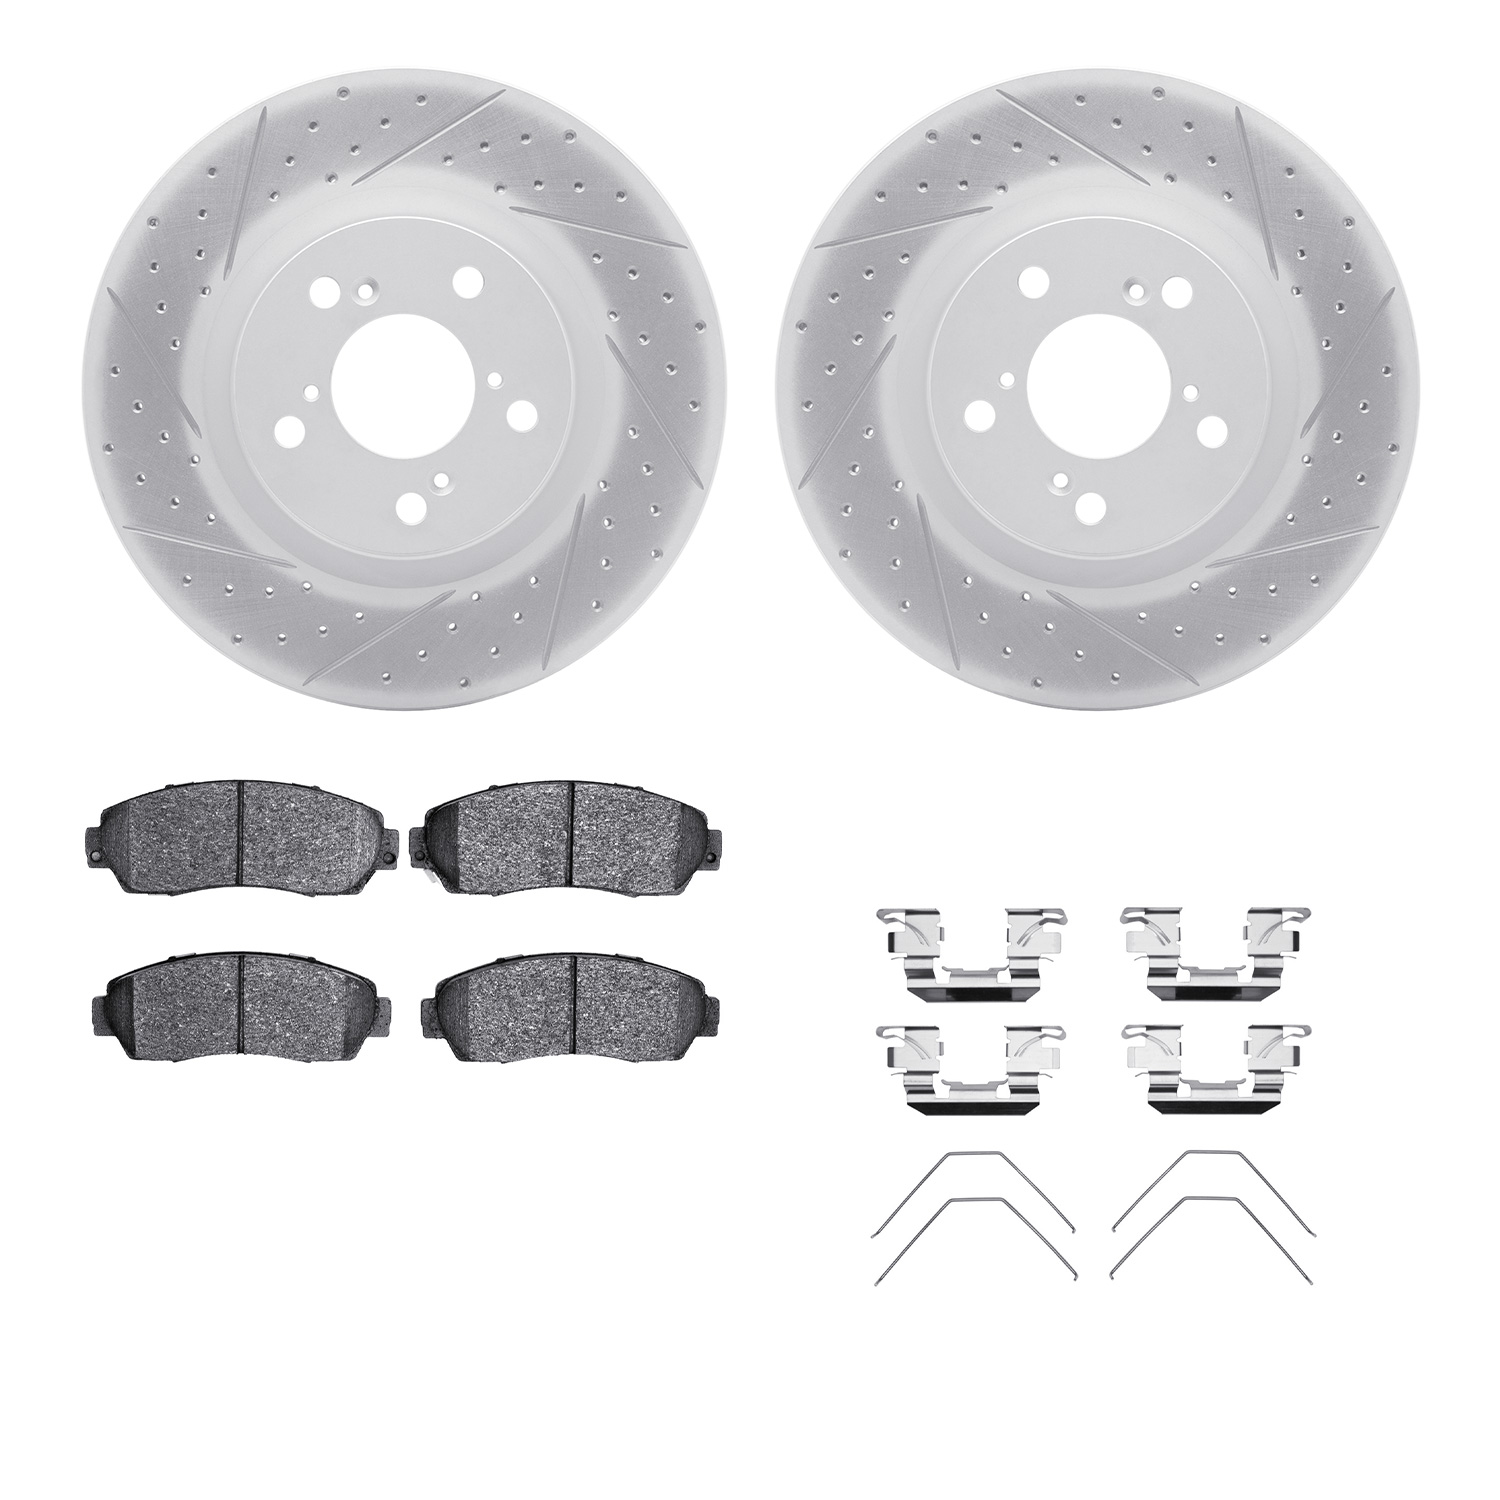 2512-59074 Geoperformance Drilled/Slotted Rotors w/5000 Advanced Brake Pads Kit & Hardware, 2011-2014 Acura/Honda, Position: Fro